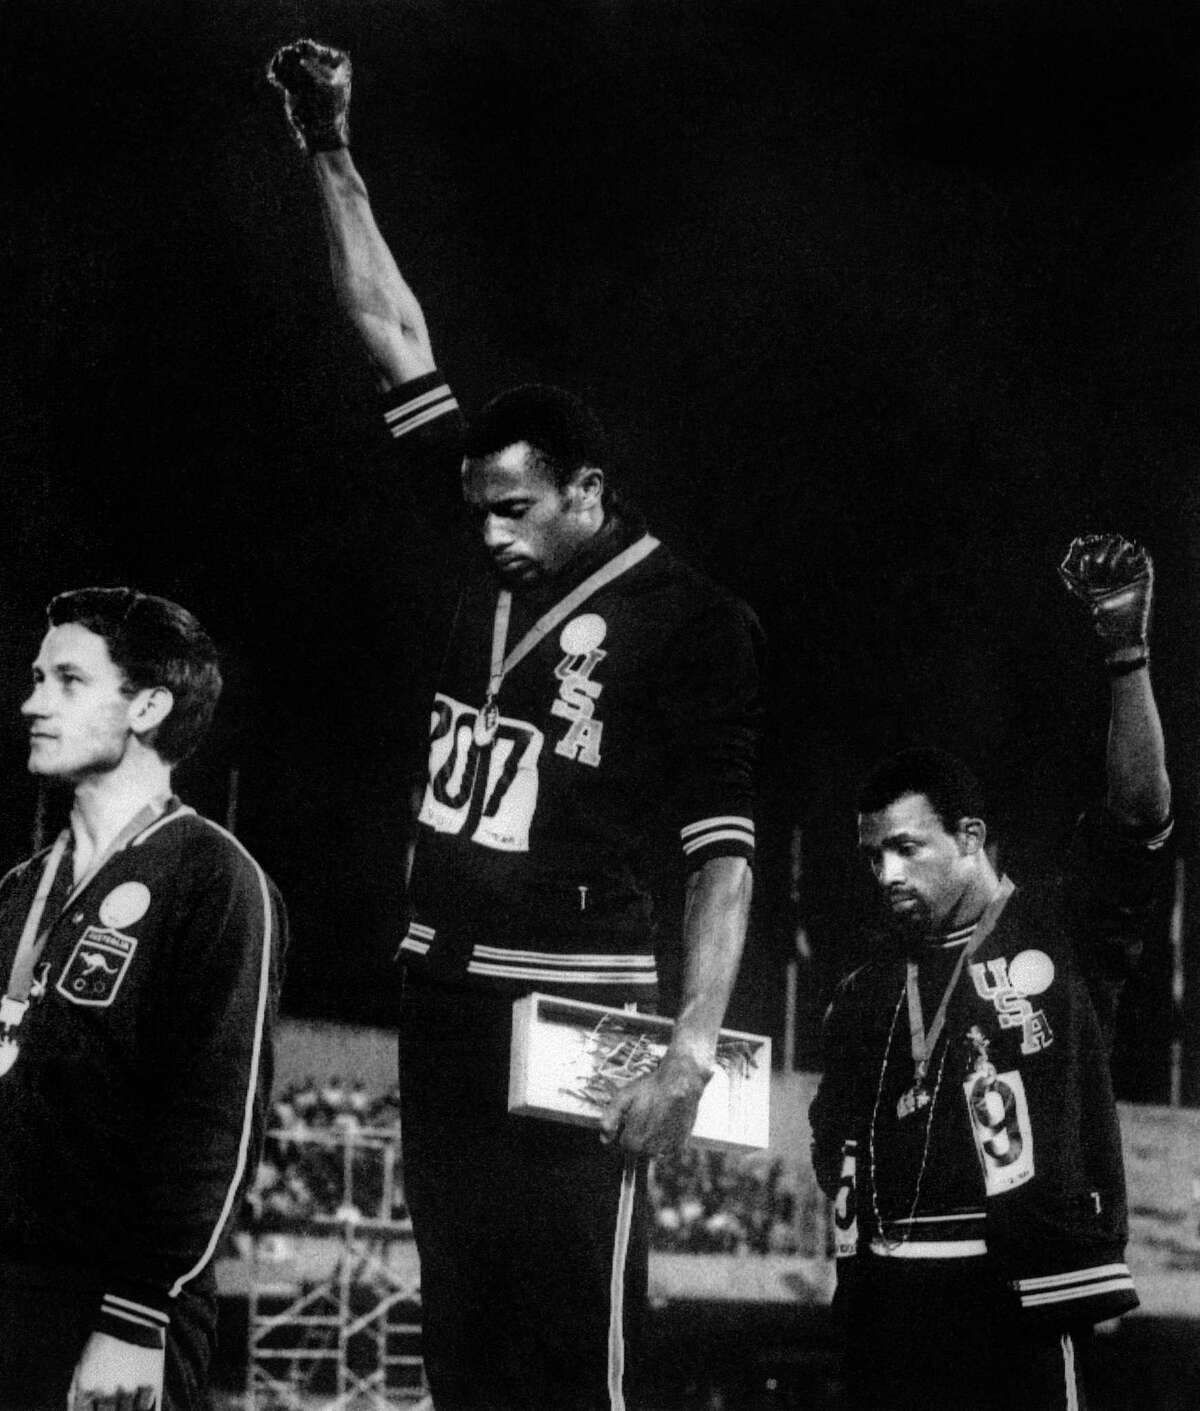 US athletes Tommie Smith (C) and John Carlos (R) raise their gloved fists in the Black Power salute to express their opposition to racism in the USA during the US national anthem, after receiving their medals 17 October 1968 for first and third place in the men's 200m event at the Mexico Olympic Games. At left is Peter Norman of Australia who took second place. The HBO Sports documentary Fists of Freedom: The Story of the '68 Summer Games explores one of the most powerful moments in sport this century